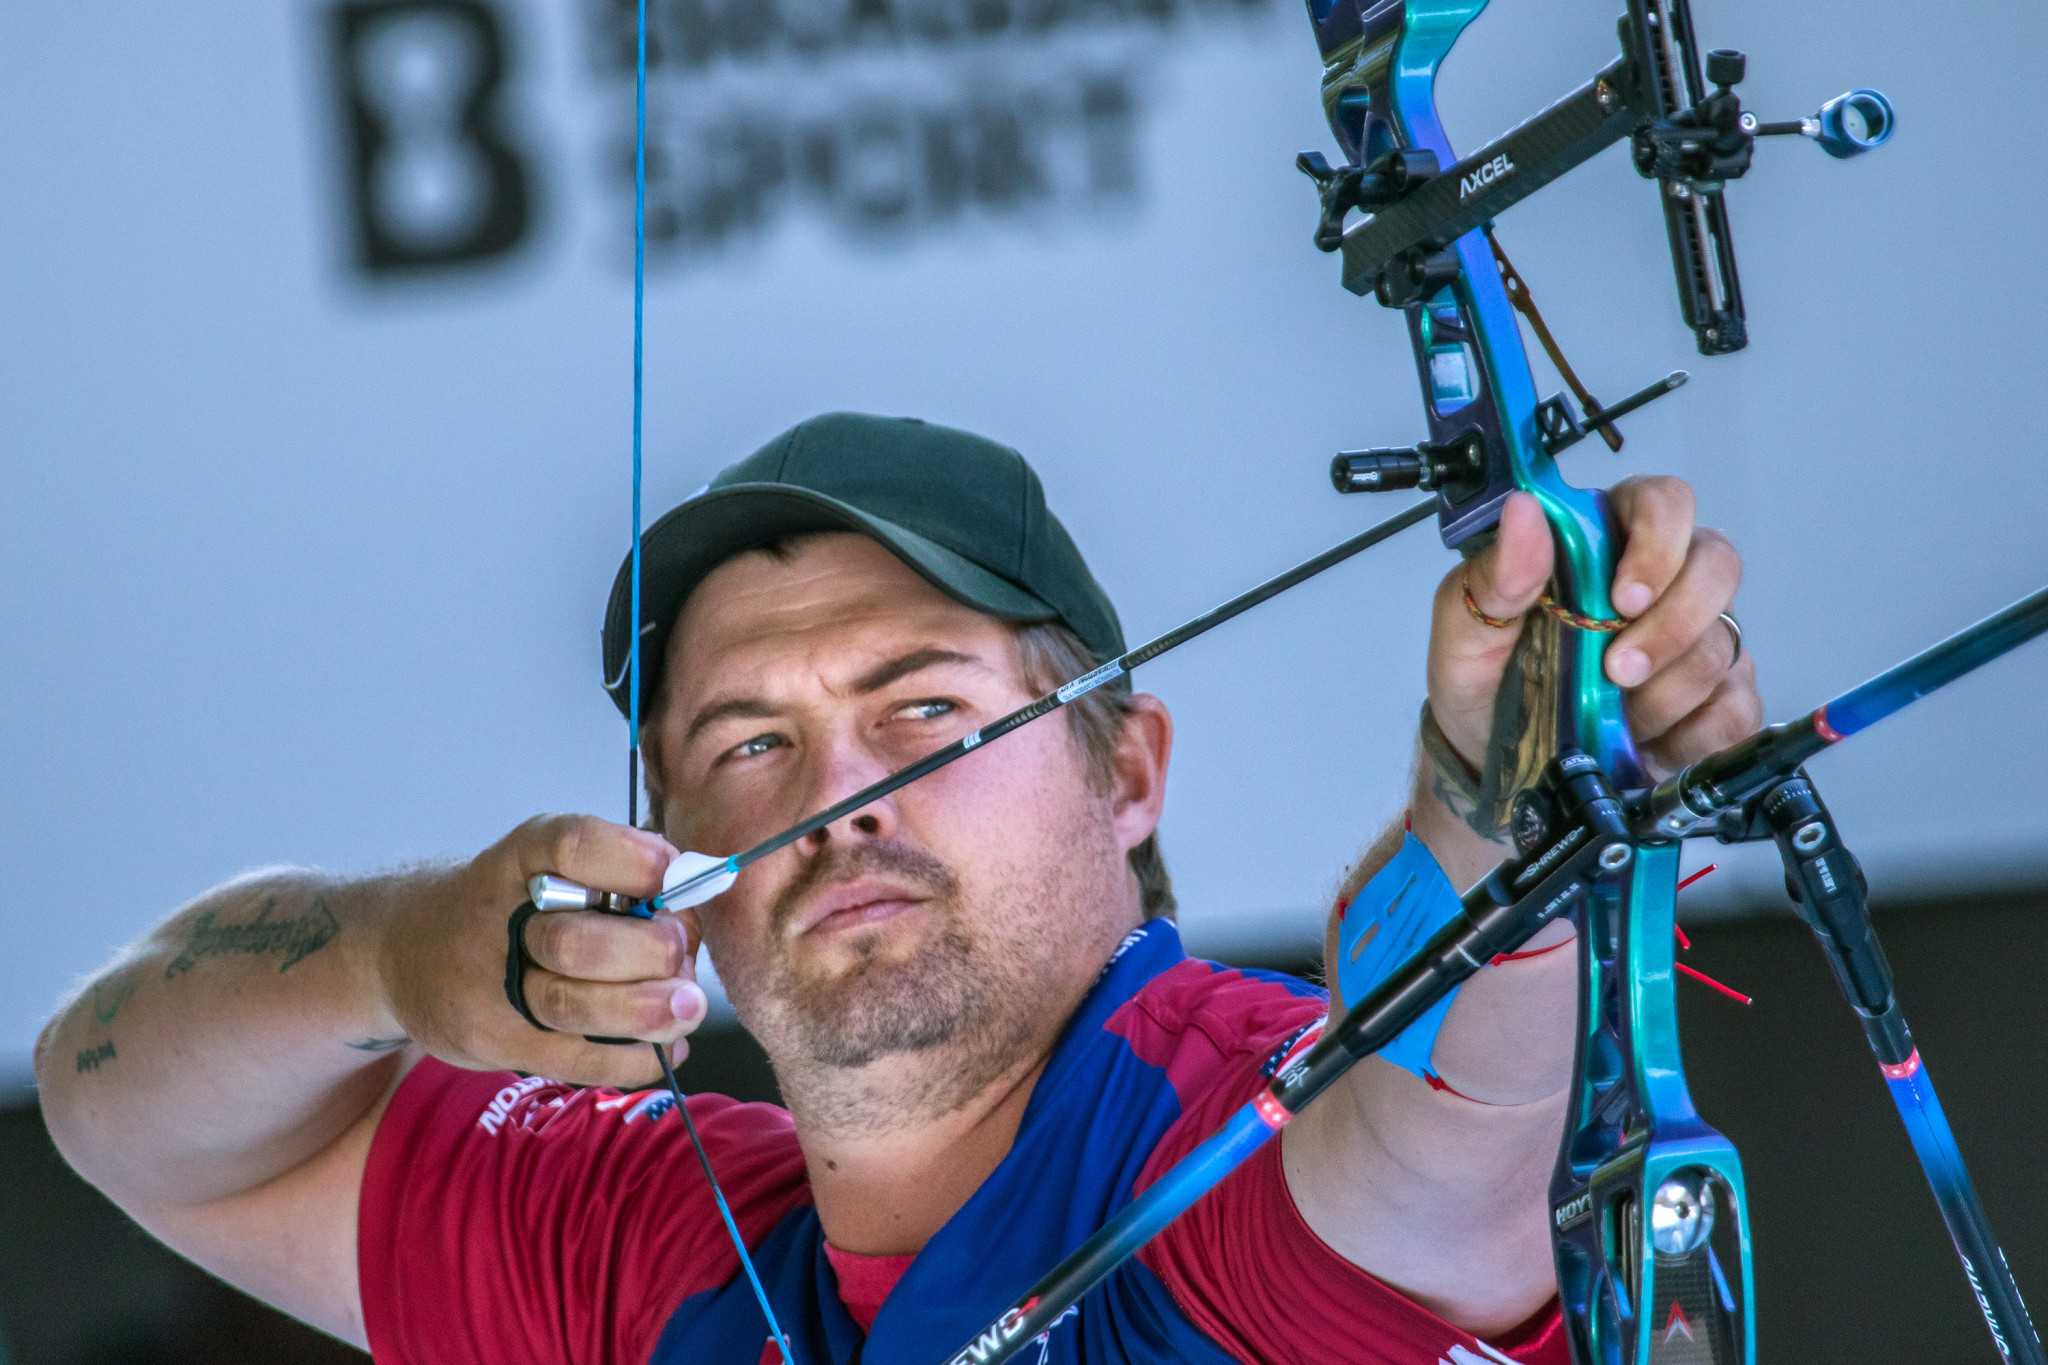 Brady Ellison became the first American man to win the recurve gold medal at the World Championships since 1985, an achievement recognised in the United States Olympic and Paralympic Committee Best of June awards.
©Getty Images